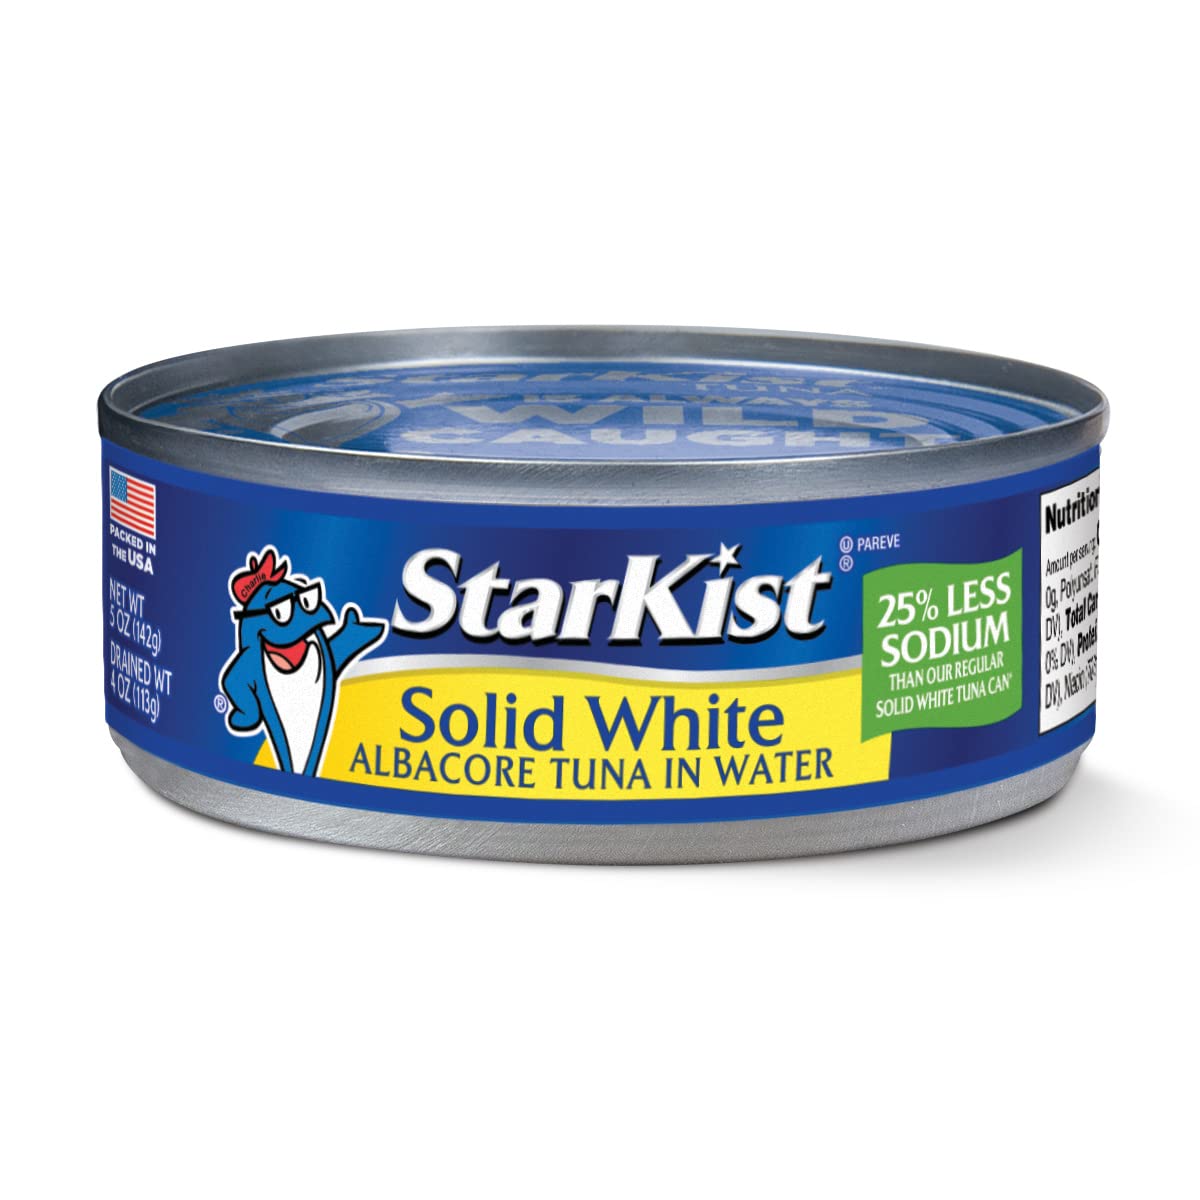 StarKist Solid White Albacore Tuna in Water 25% Less Sodium - 4 - 5 oz Cans (Pack of 6) - 24 Cans Total